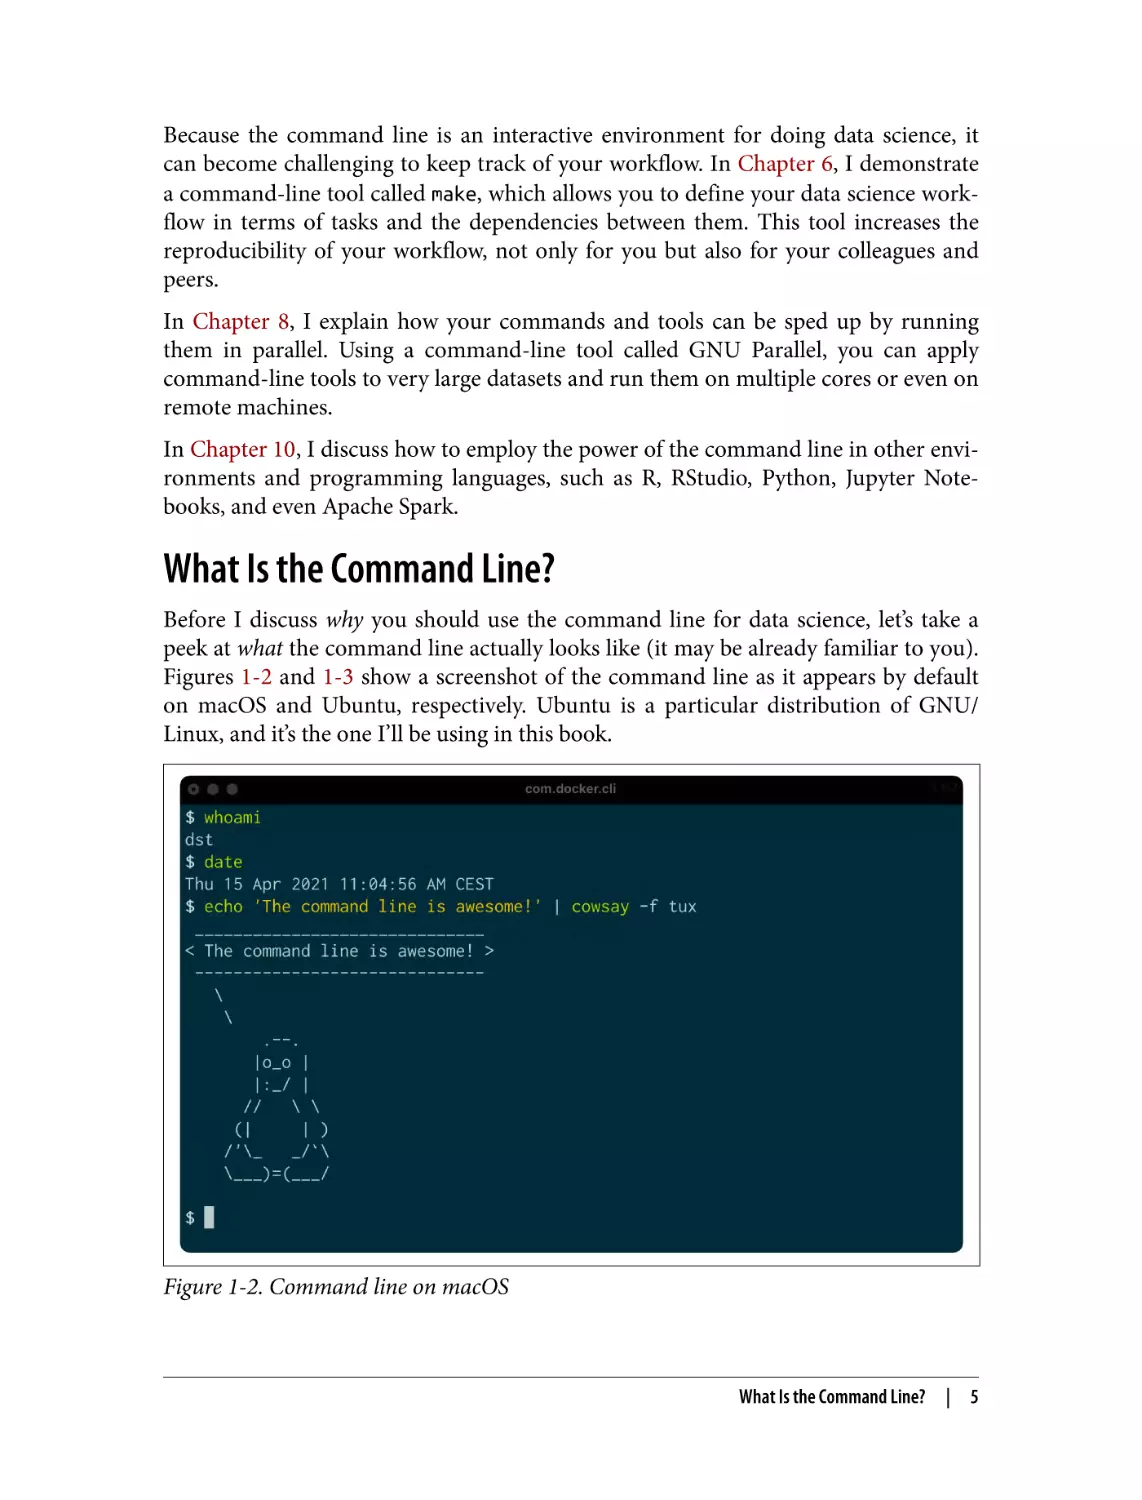 What Is the Command Line?